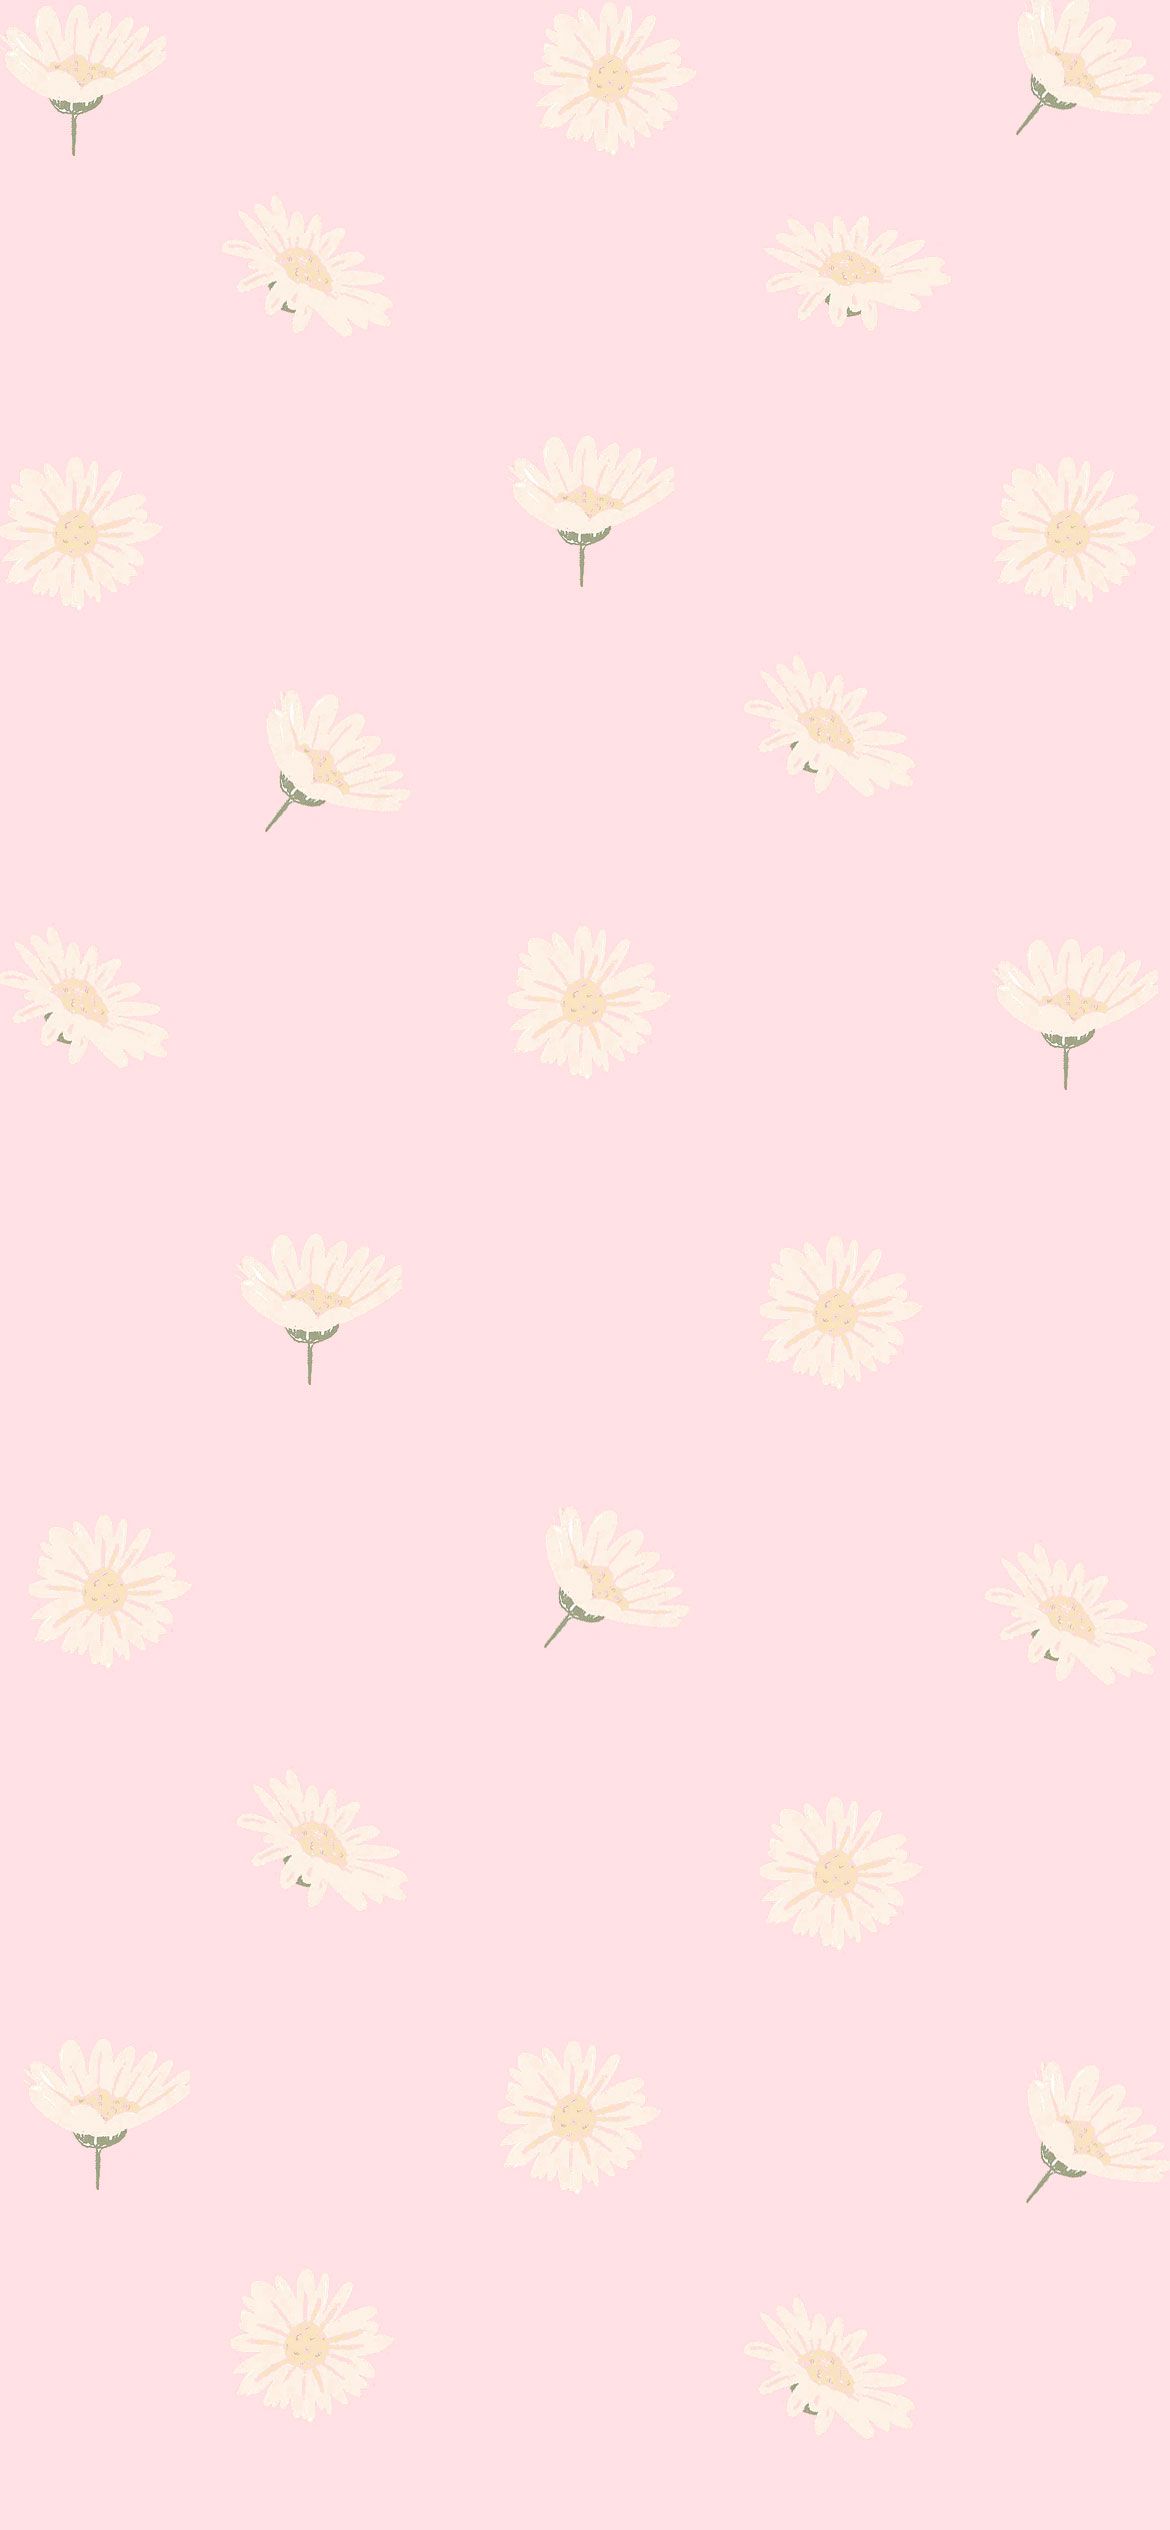 Pink Aesthetic Picture : Daisy on Pink Wallpaper